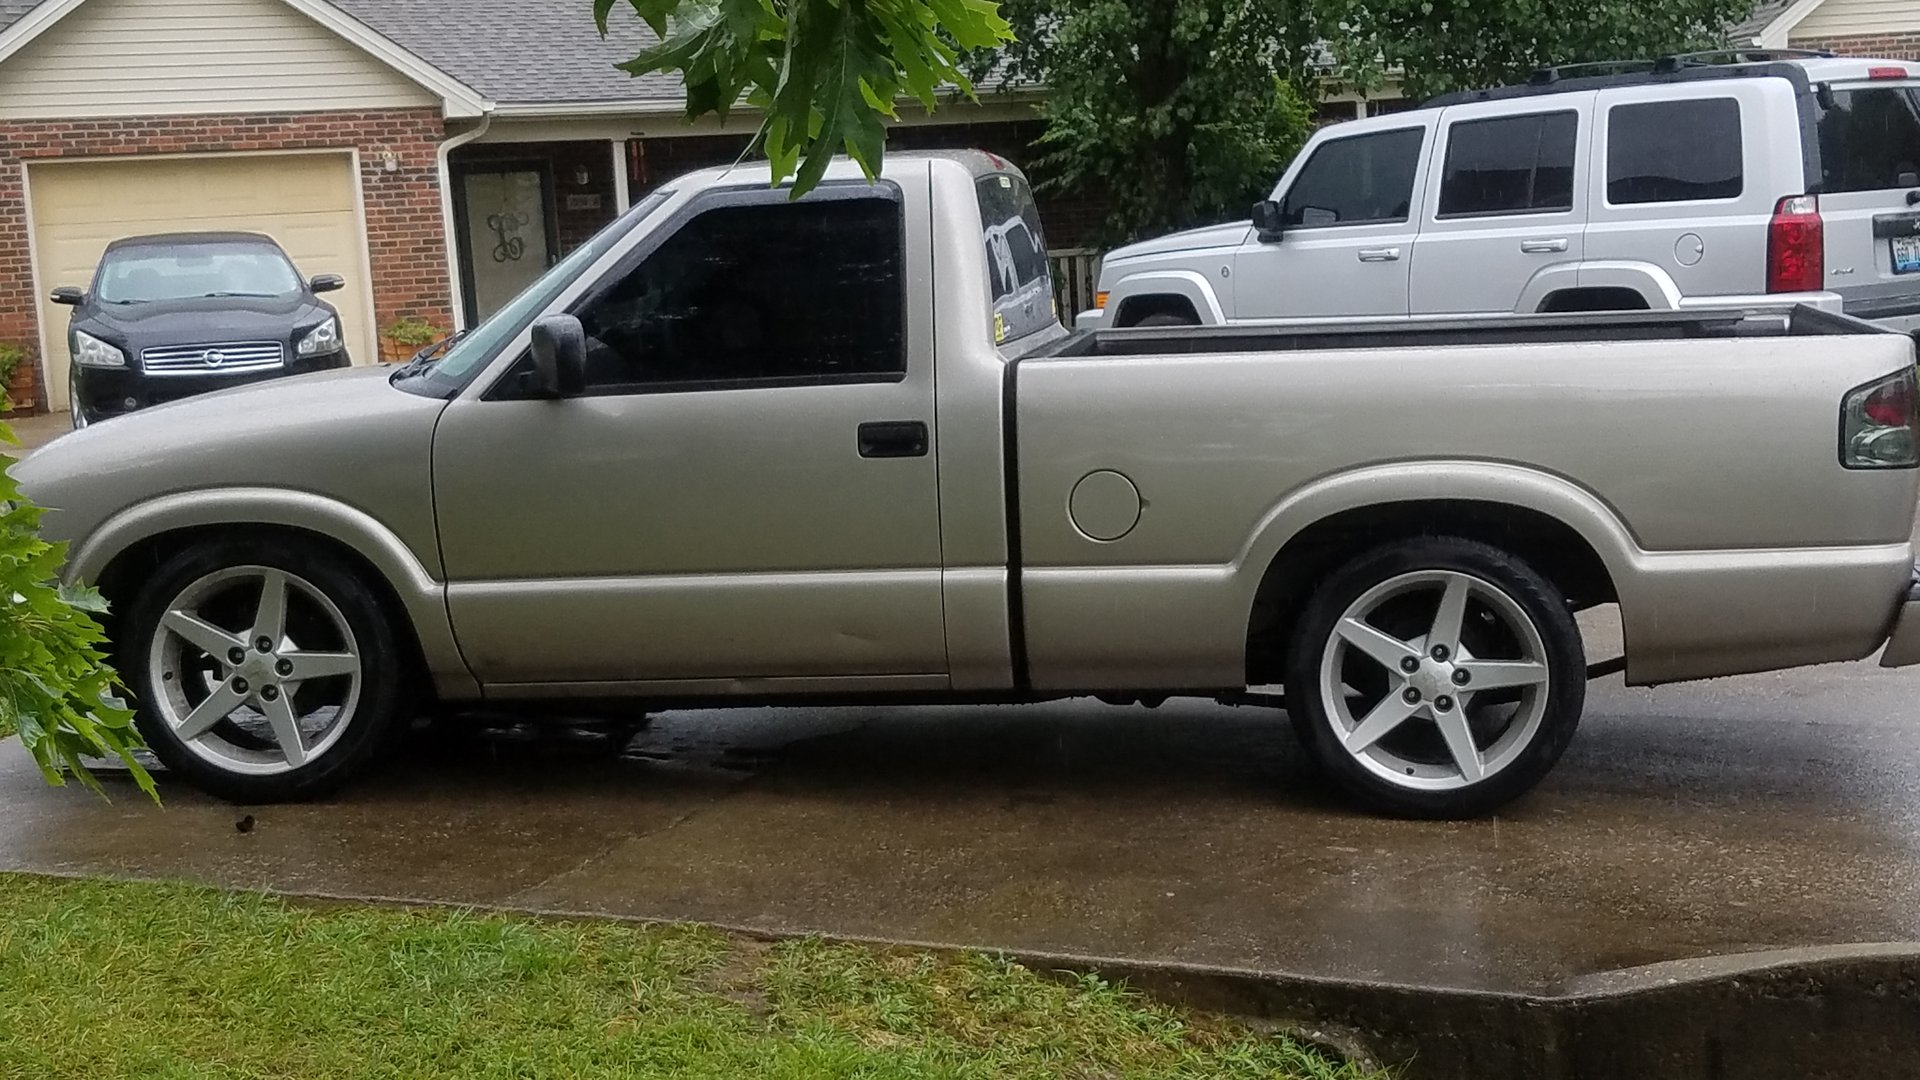 2000 GMC Sonoma Turbocharged For Sale | S-10 Forum